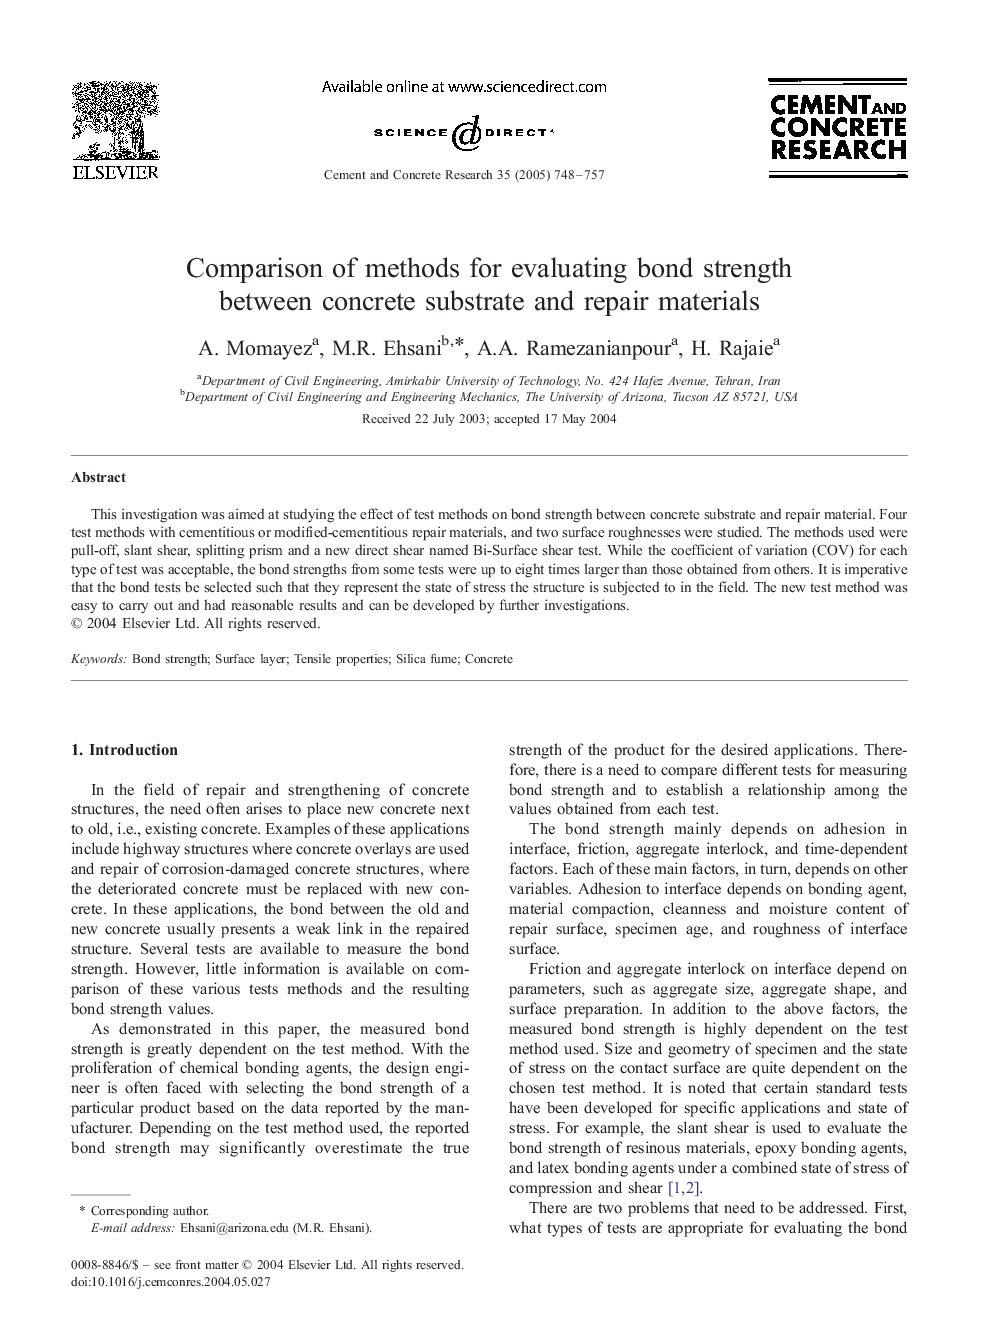 Comparison of methods for evaluating bond strength between concrete substrate and repair materials